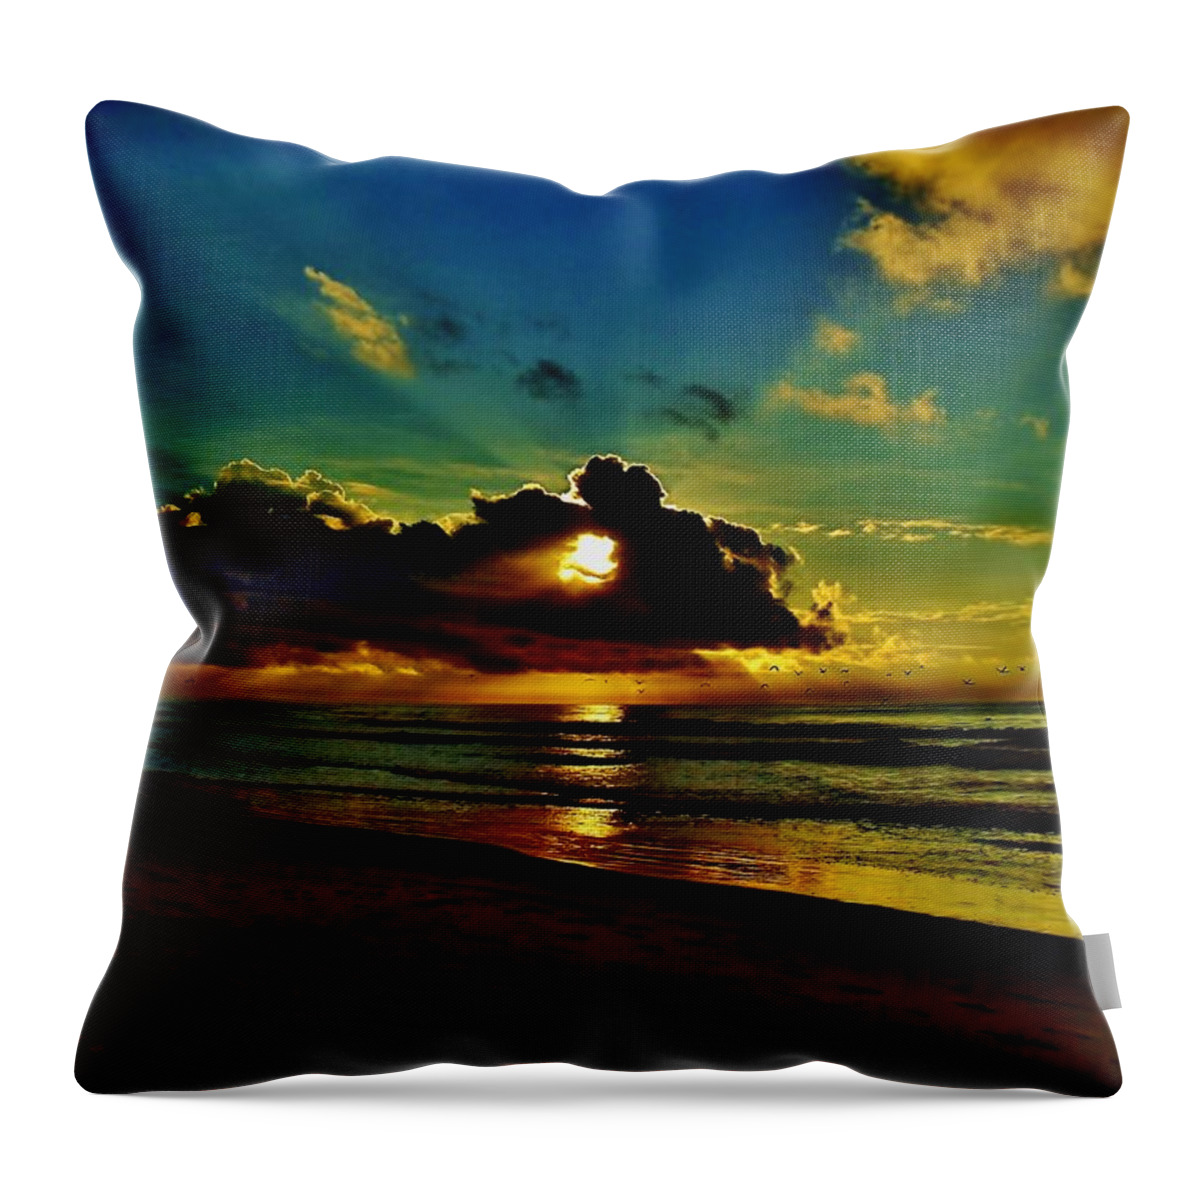 Sunrise Throw Pillow featuring the photograph Wildwood Sunrise by Ed Sweeney